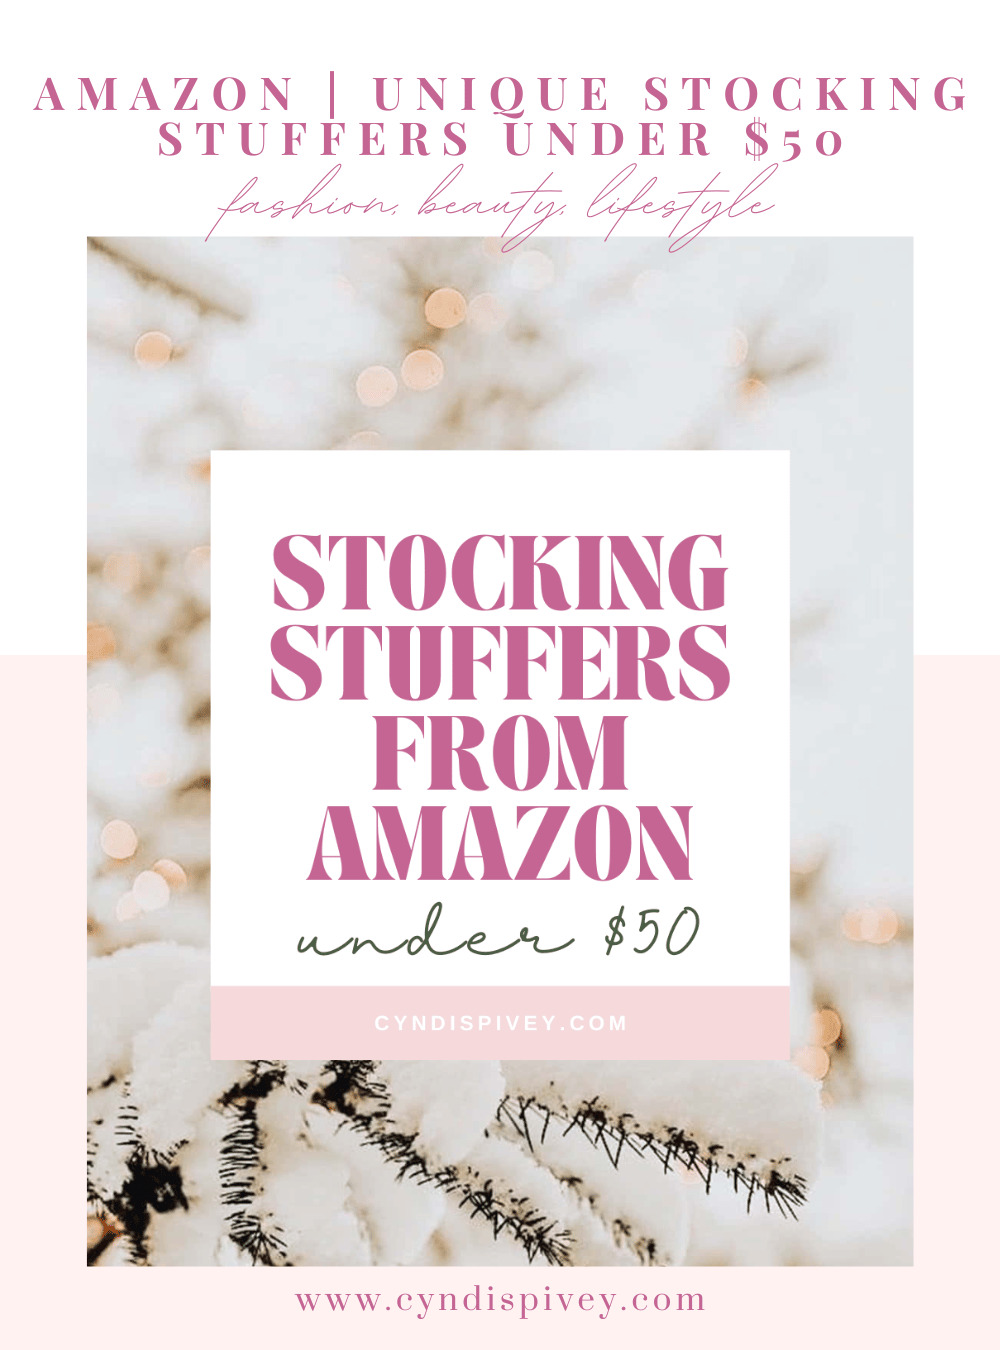 unique stocking stuffers under $50 from amazon, unique stocking stuffers, affordable gift guide, affordable stocking stuffers from amazon, amazon top picks, gift ideas on a budget, budget-friendly gift ideas, budget-friendly stocking stuffers, holiday gift guides, holiday gift ideas, trendy gift ideas, trendy stocking stuffers, trendy amazon finds, best stocking stuffers, stocking stuffers people actually want, gift ideas they will love, pin for later, pinterest gift guides, pinterest gift ideas, trendy pinterest finds